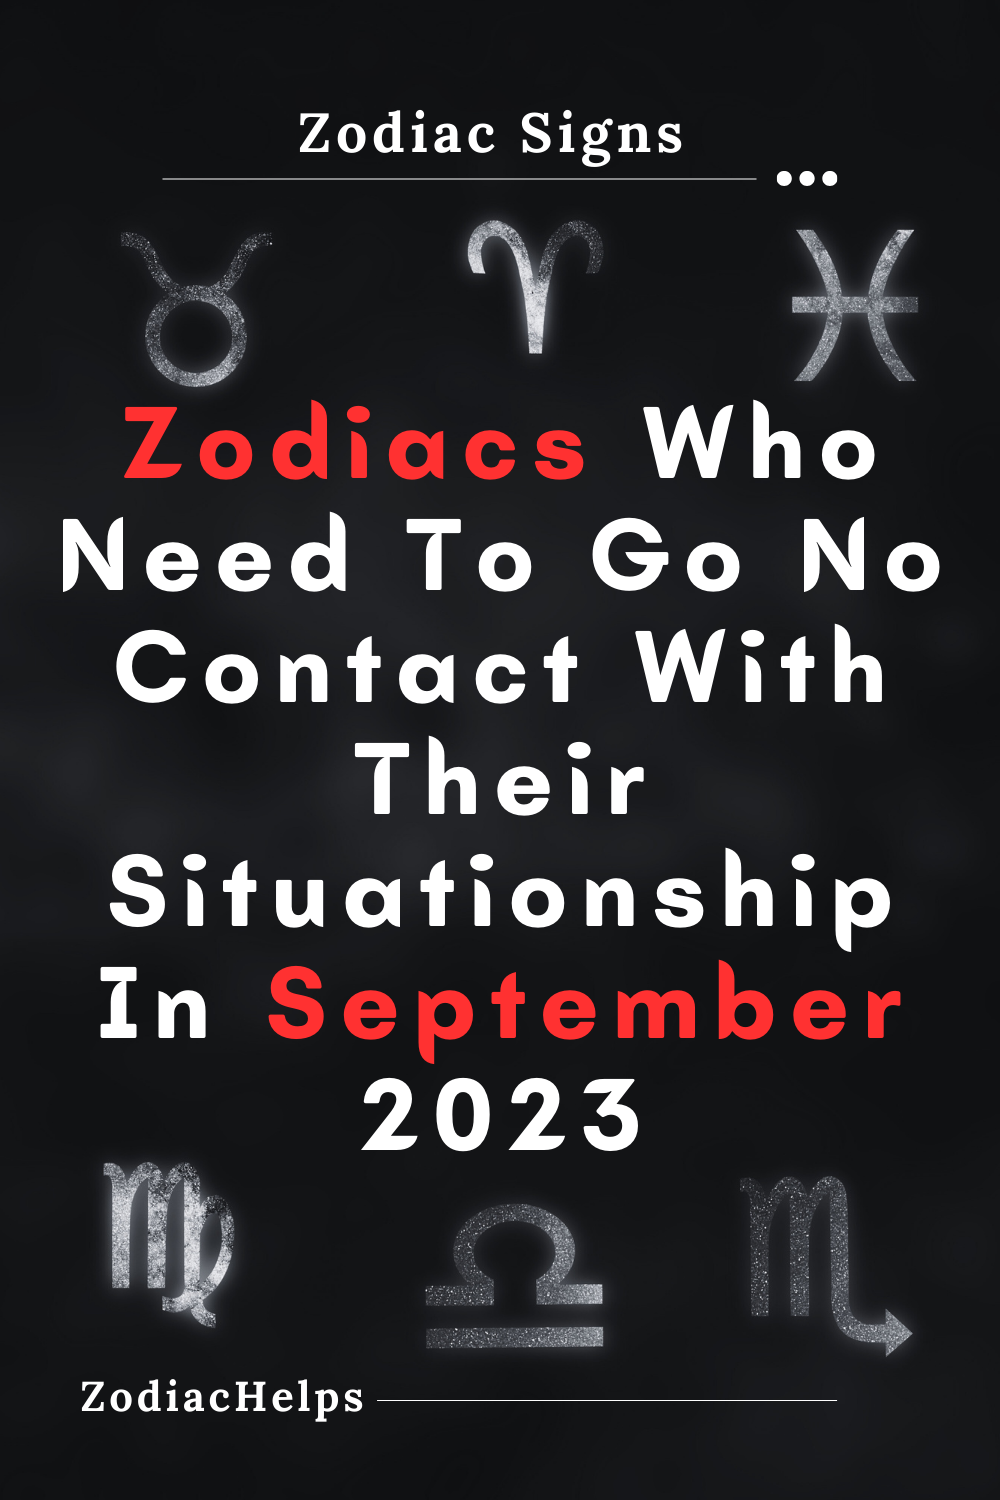 Zodiacs Who Need To Go No Contact With Their Situationship In September 2023